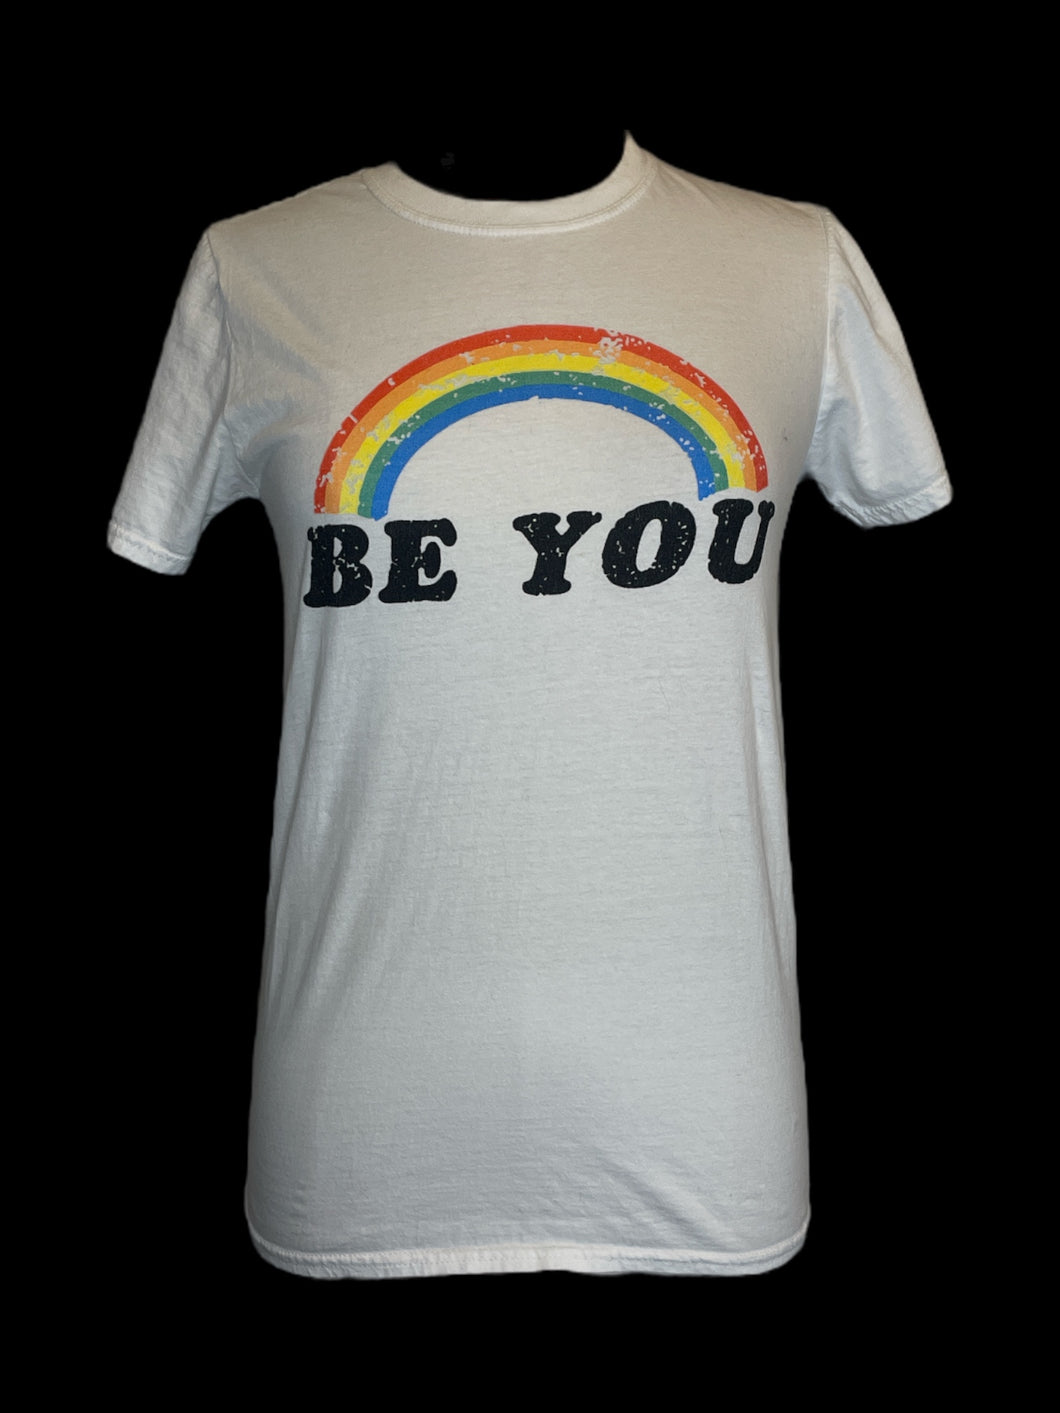 M White short sleeve crew neck cotton top w/ black “Be You” text, & rainbow graphic